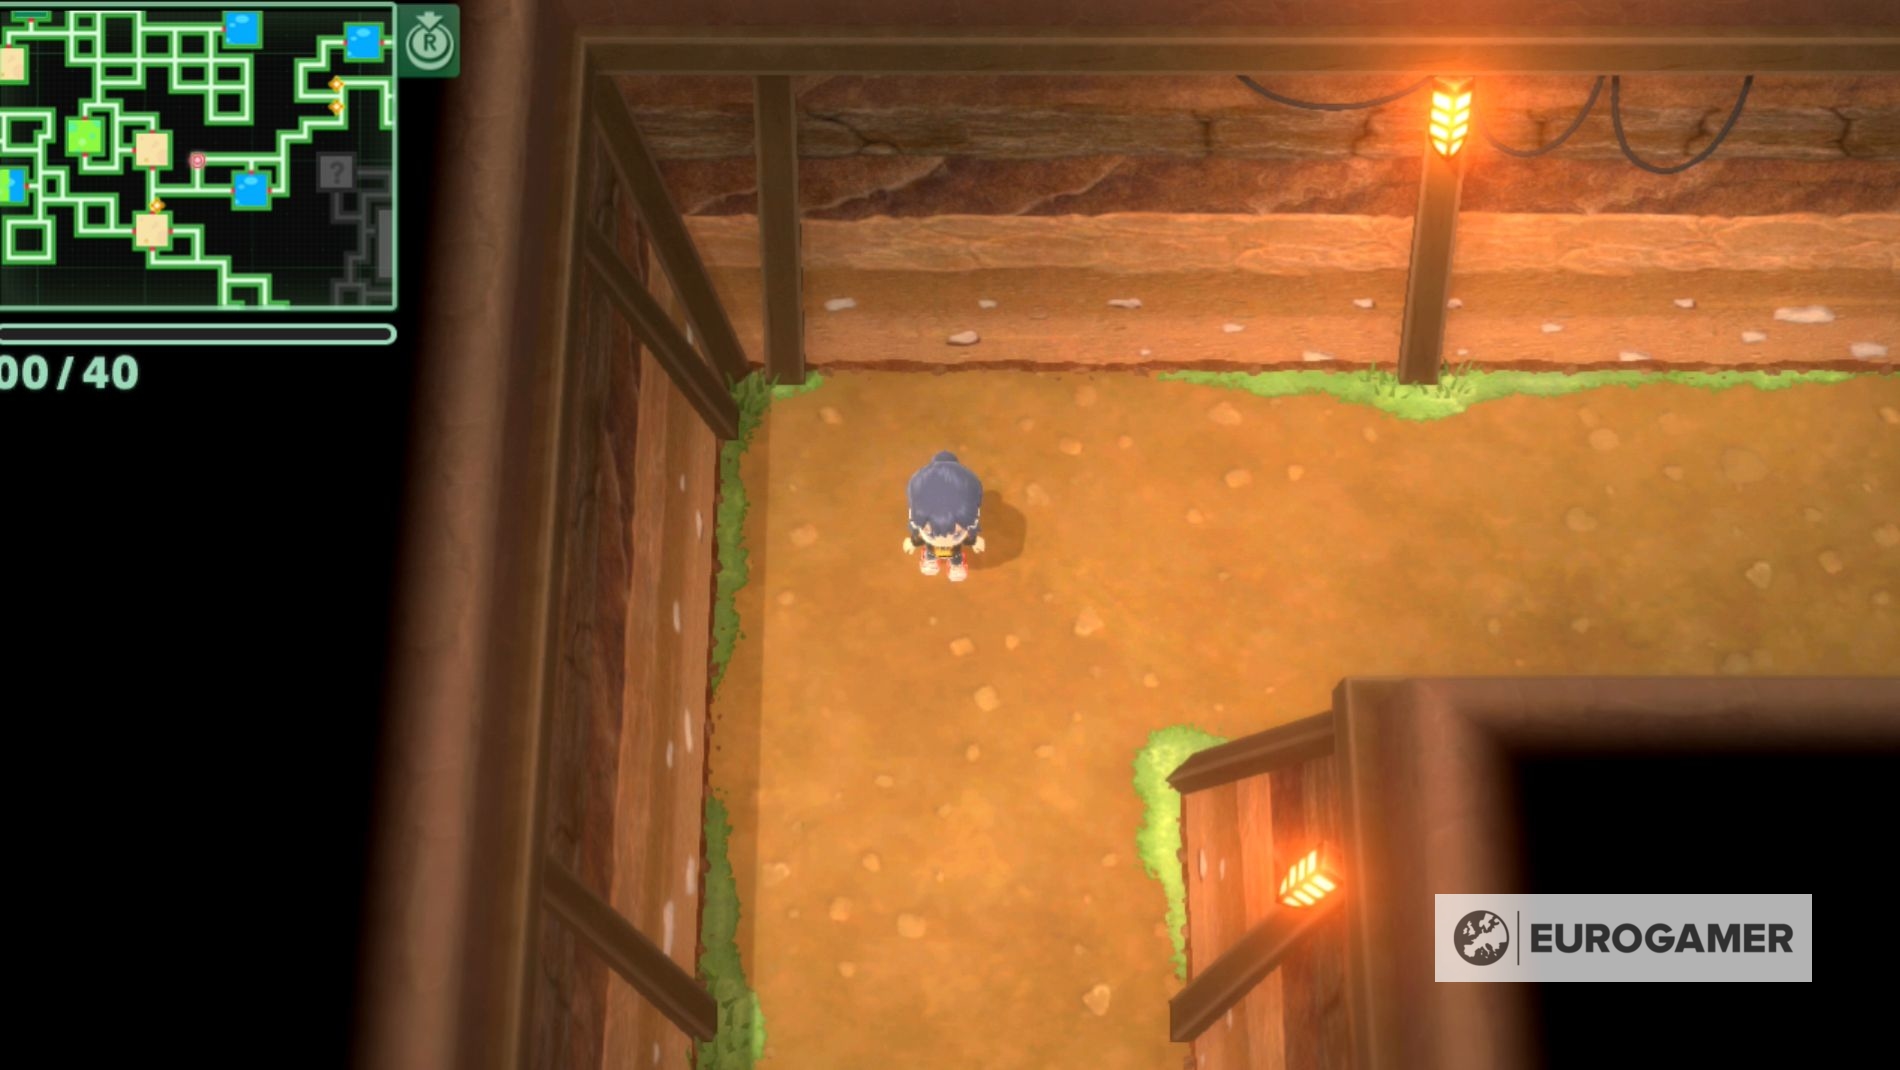 Grand Underground map how to dig and Secret Base statues in Pokémon Brilliant Diamond and Shining Pearl